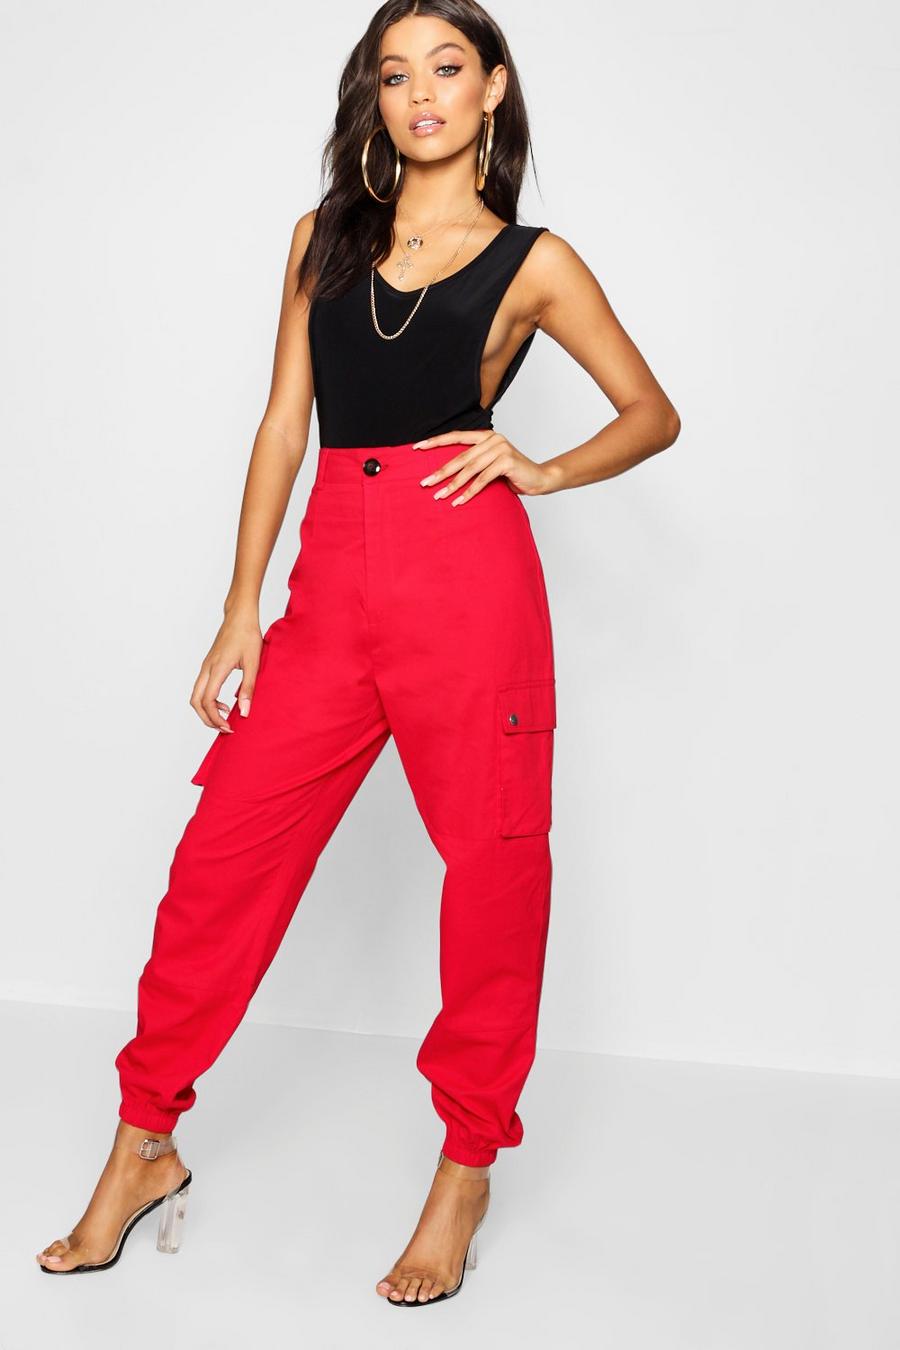 Fashion (Red)Habbris Fall Solid Bandage Cargo Pants Fall Outfit For Women  2022 High Waist Pocket Long Pants Female Fashion Casual Trousers XXA @ Best  Price Online